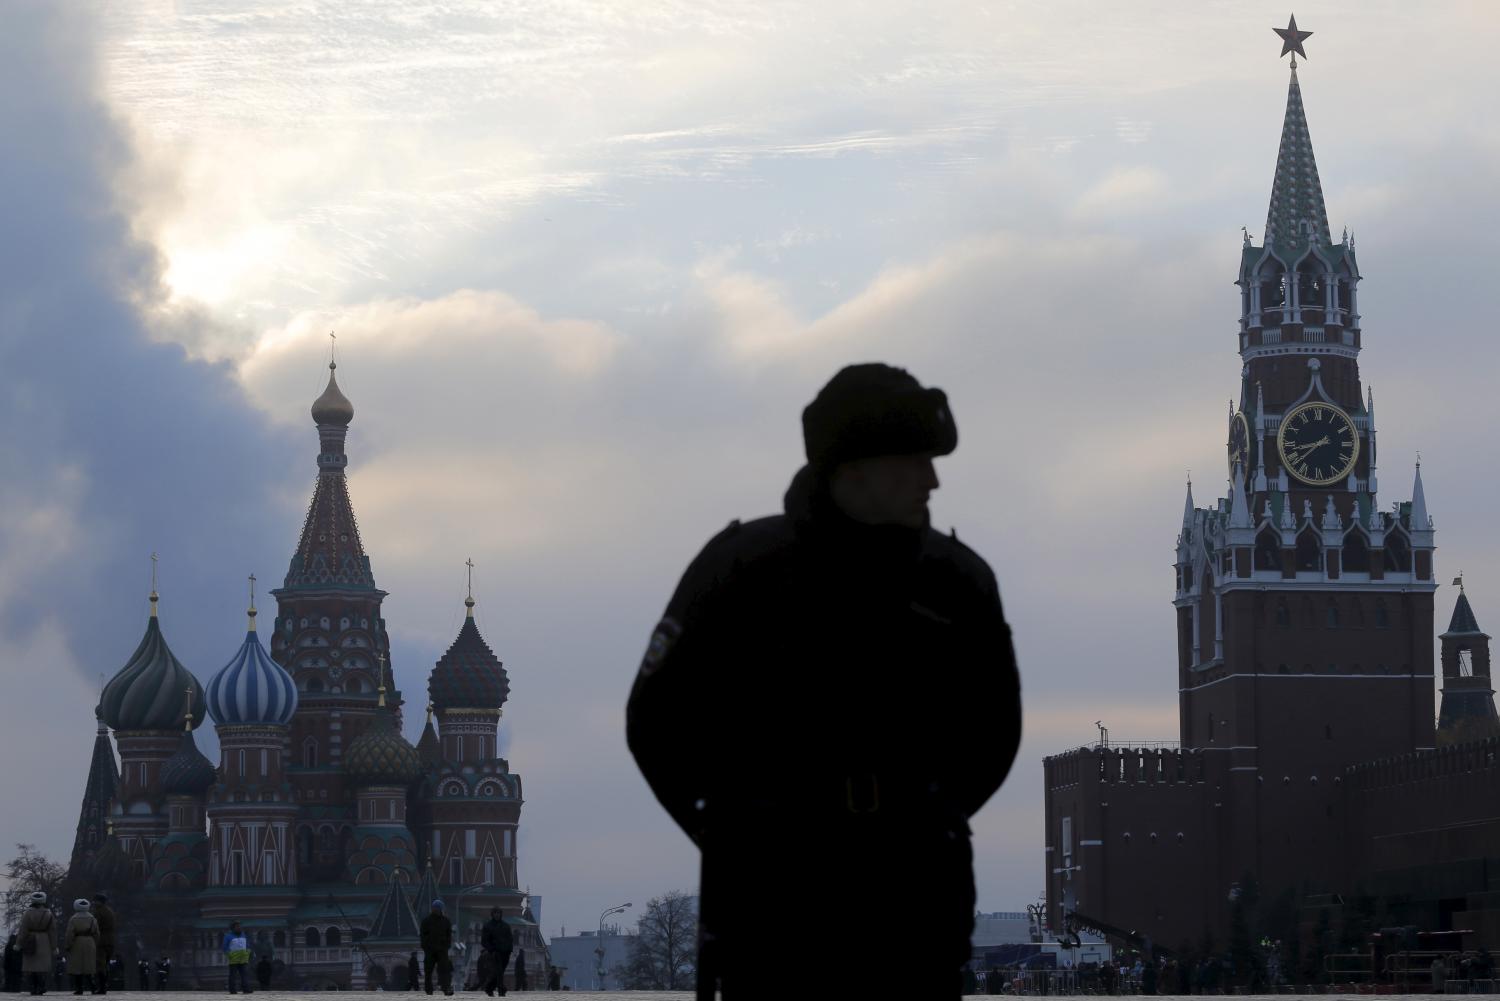 An Interior Ministry member stands guard on Red Square with parts of the Kremlin seen in the background.